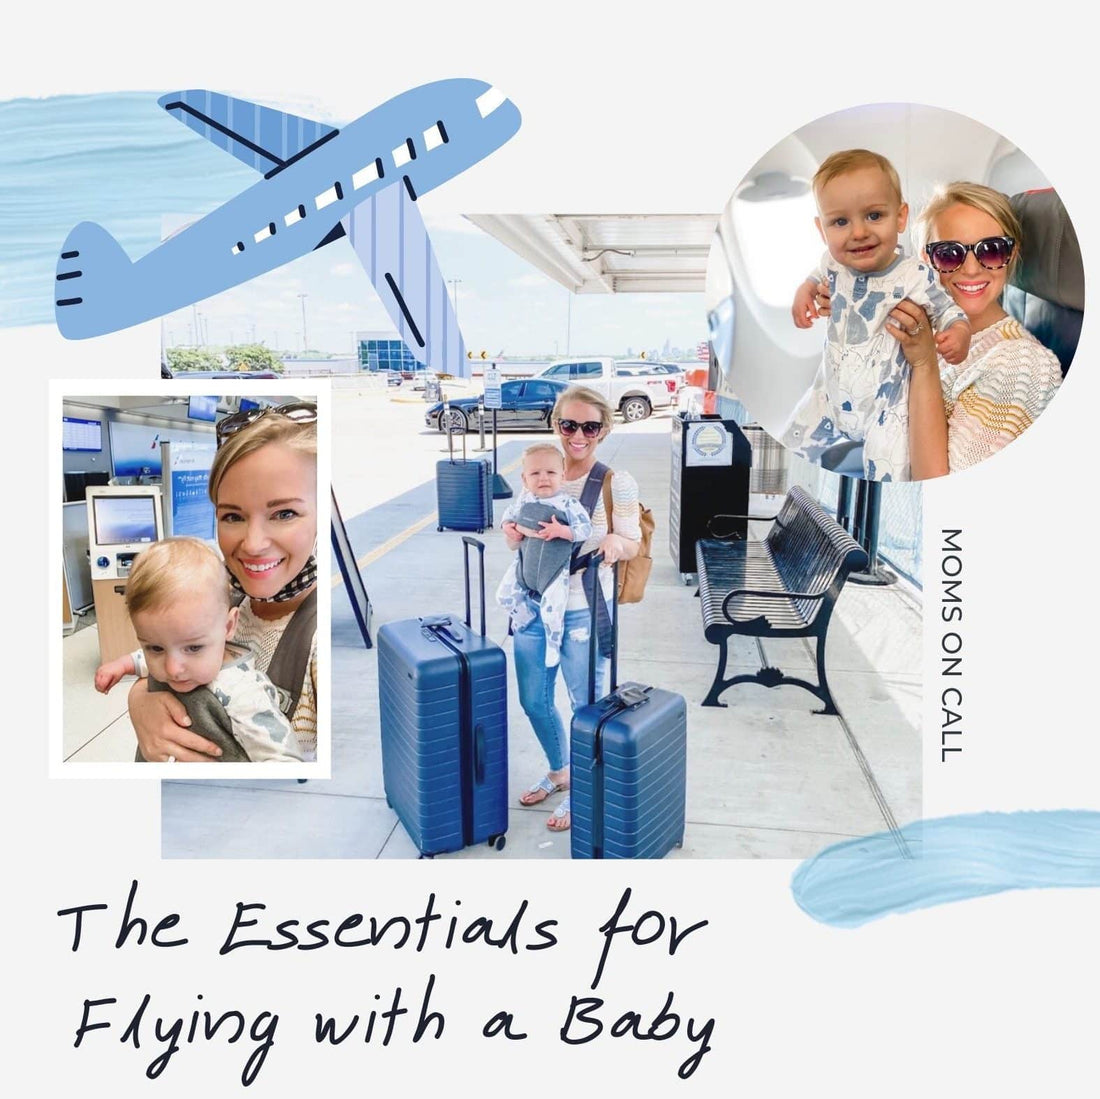 The Essentials for Flying With a Baby